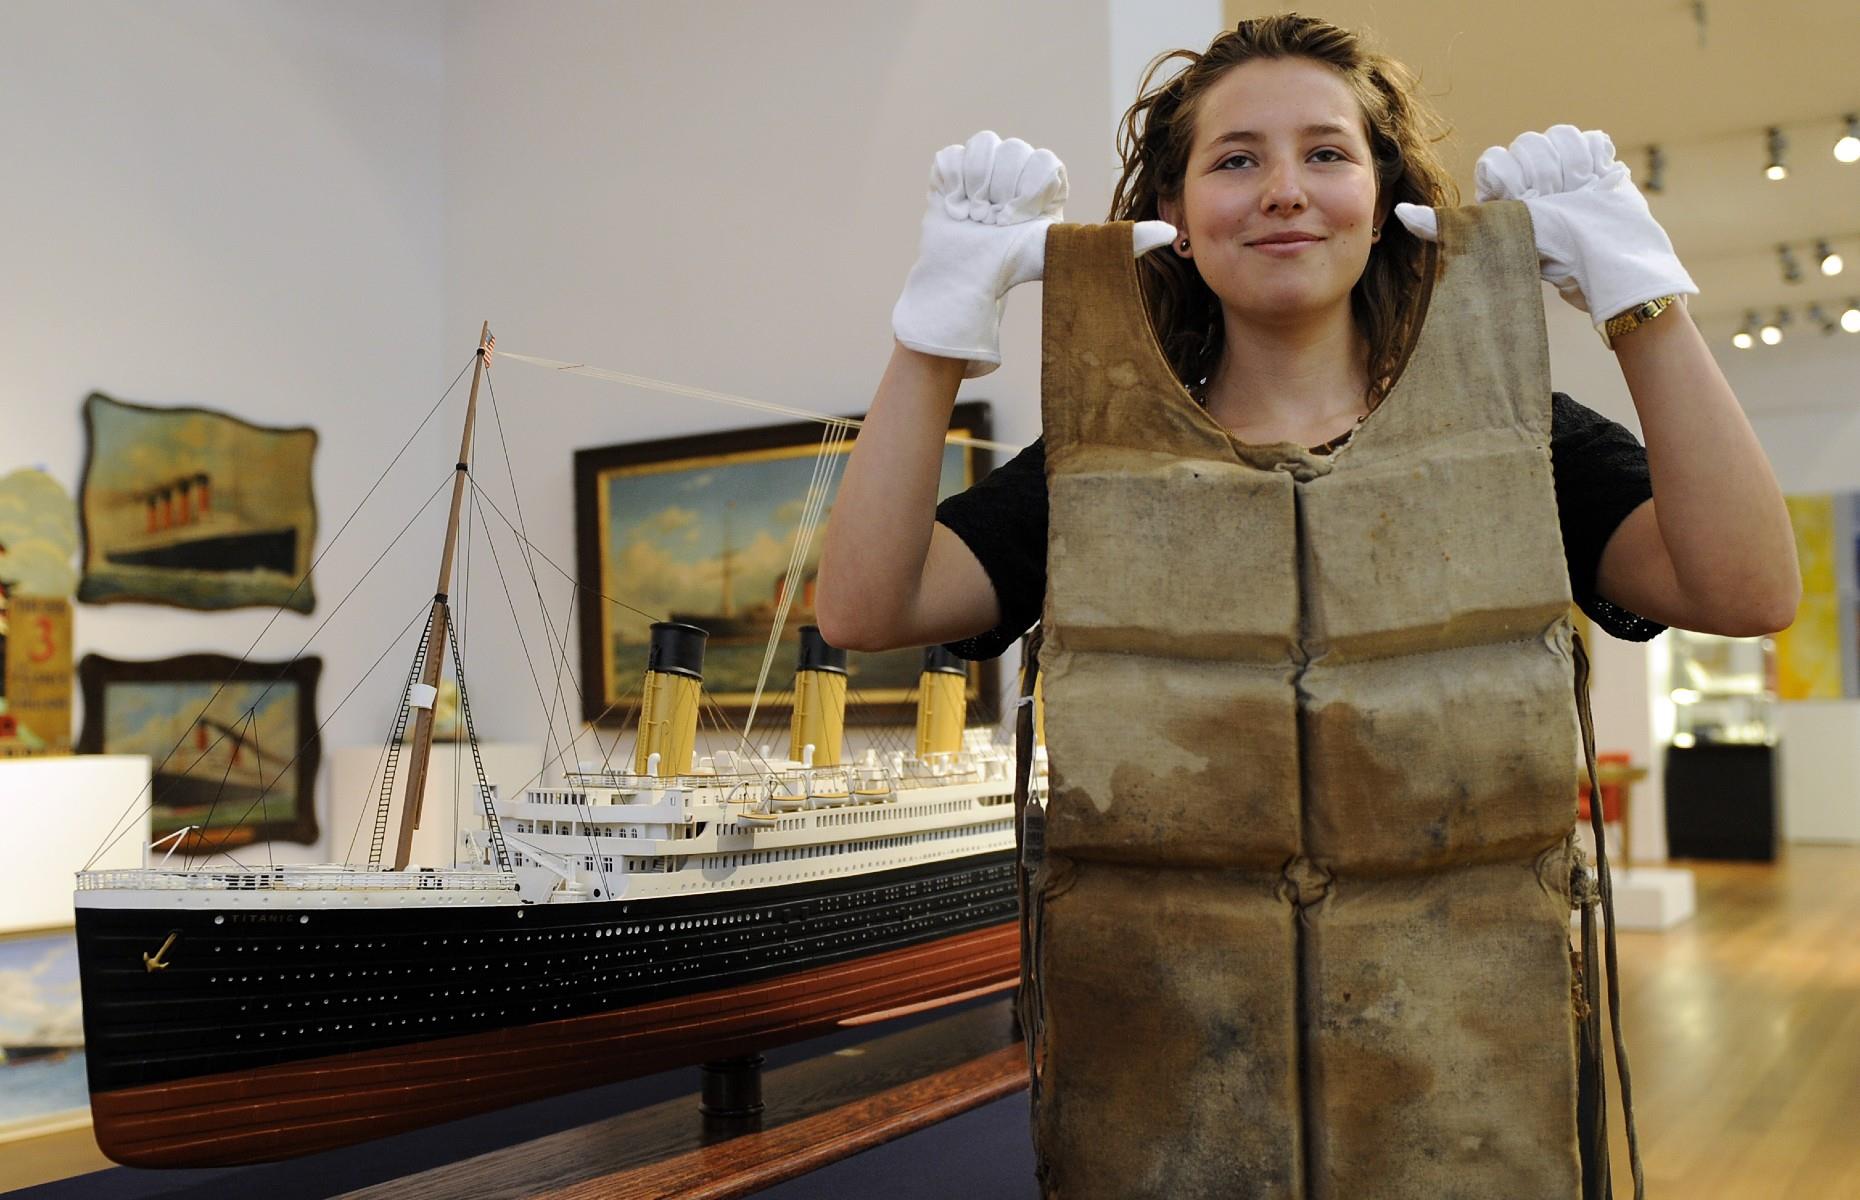 treasures of the titanic discover some famous objects rescued from the shipwreck.ghtml